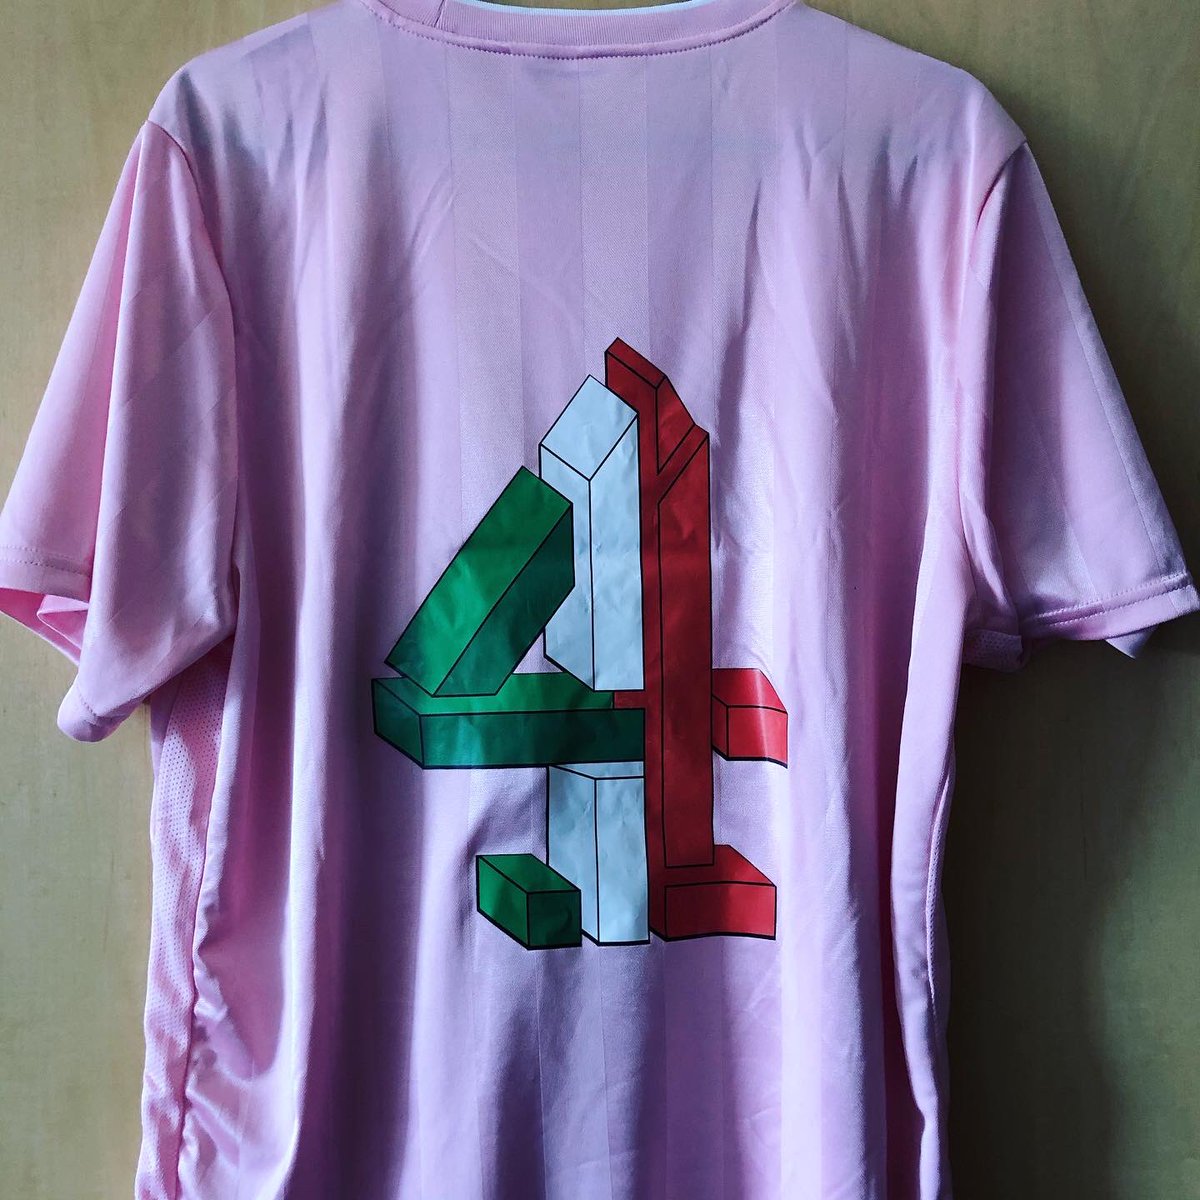 Football Italia Novelty Kit @FootballCreatioFootball fans in the UK have been reminiscing about cult show  #FootballItalia.This shirt - pink as the  #GazzettaDelloSport that  @acjimbo always read on the show - is my way of manifesting my nostalgia for a period I never lived